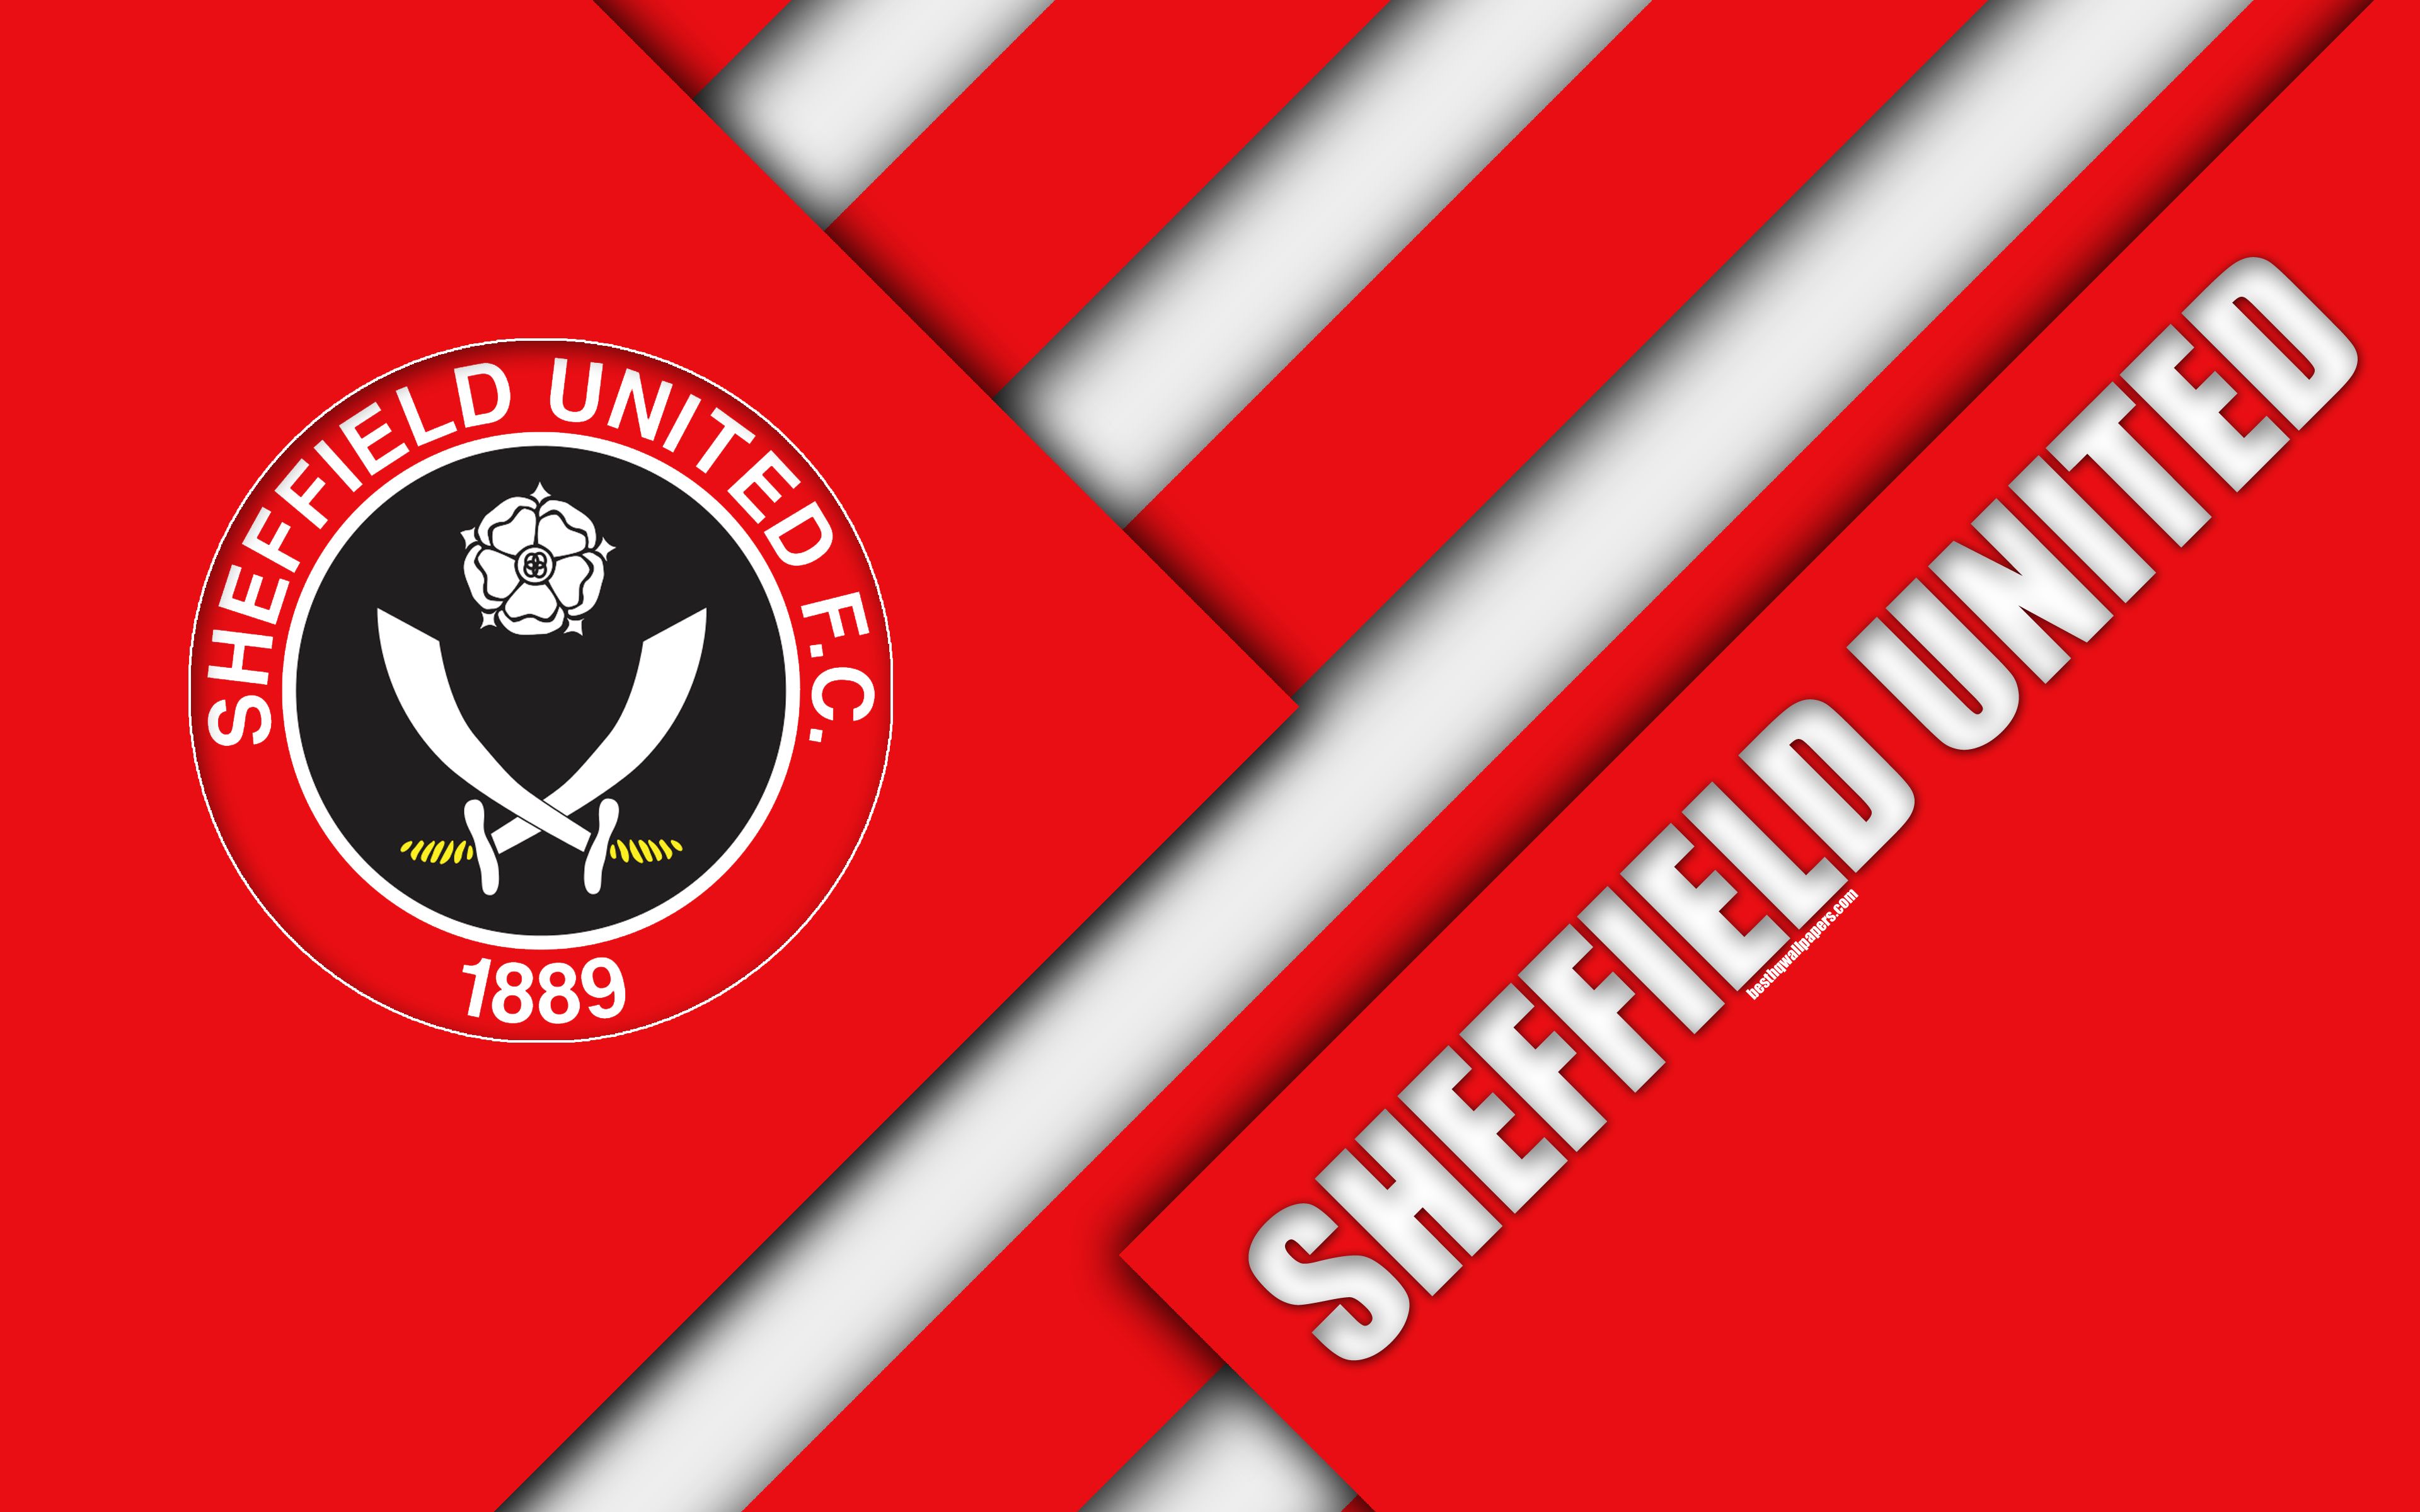 Download wallpaper Sheffield United FC, logo, 4k, red abstraction